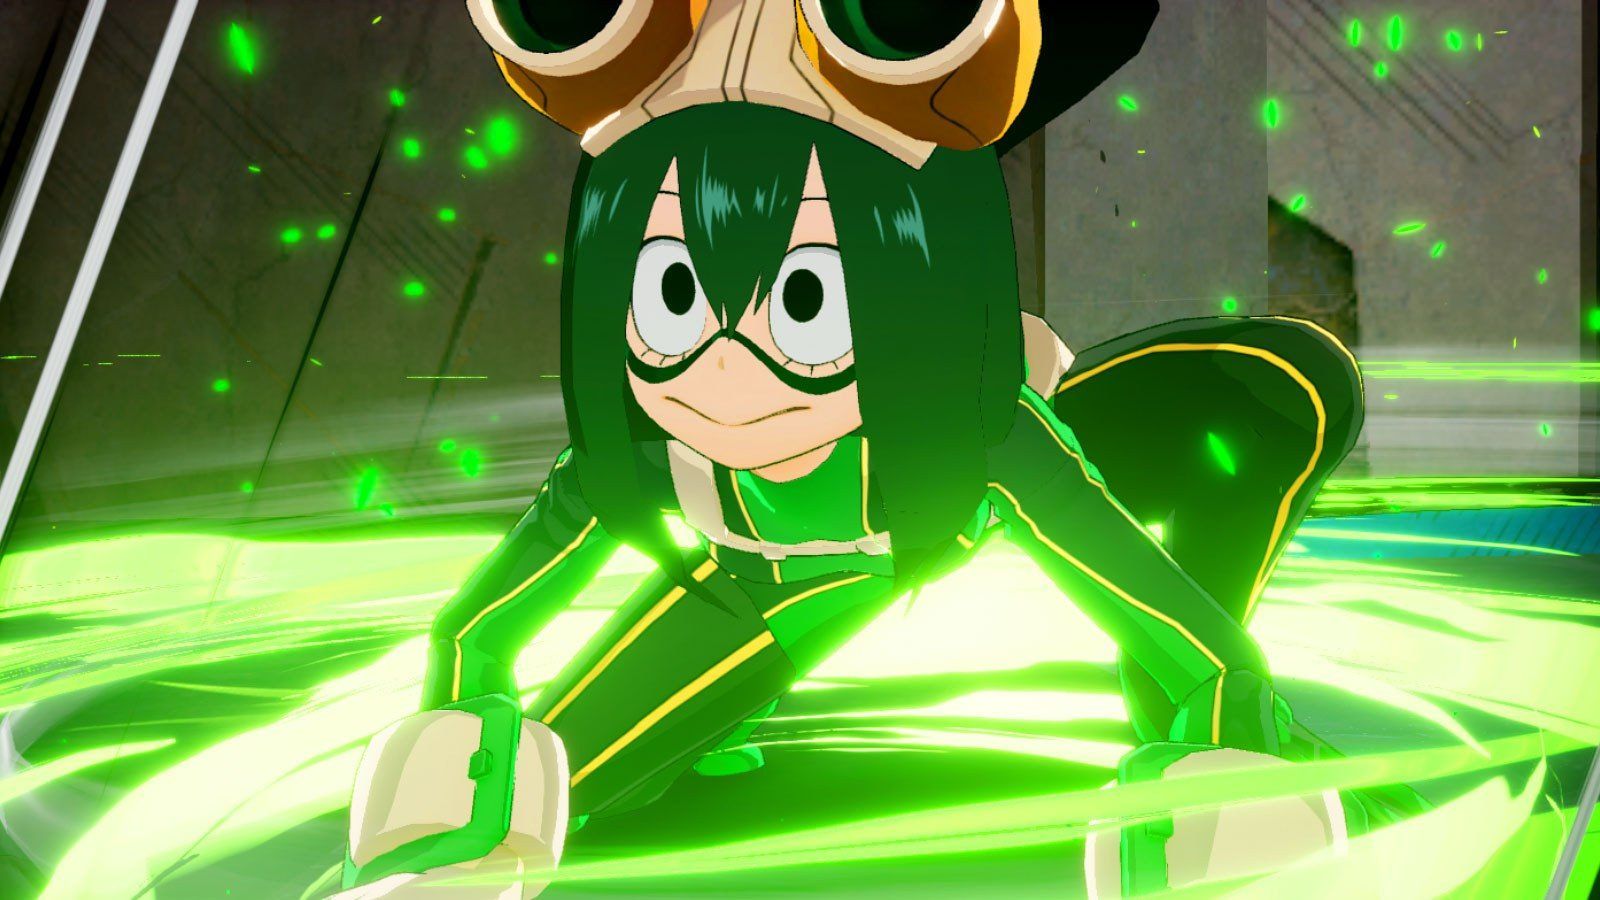 My Hero Academia's Froppy comes to life with insanely detailed cosplay